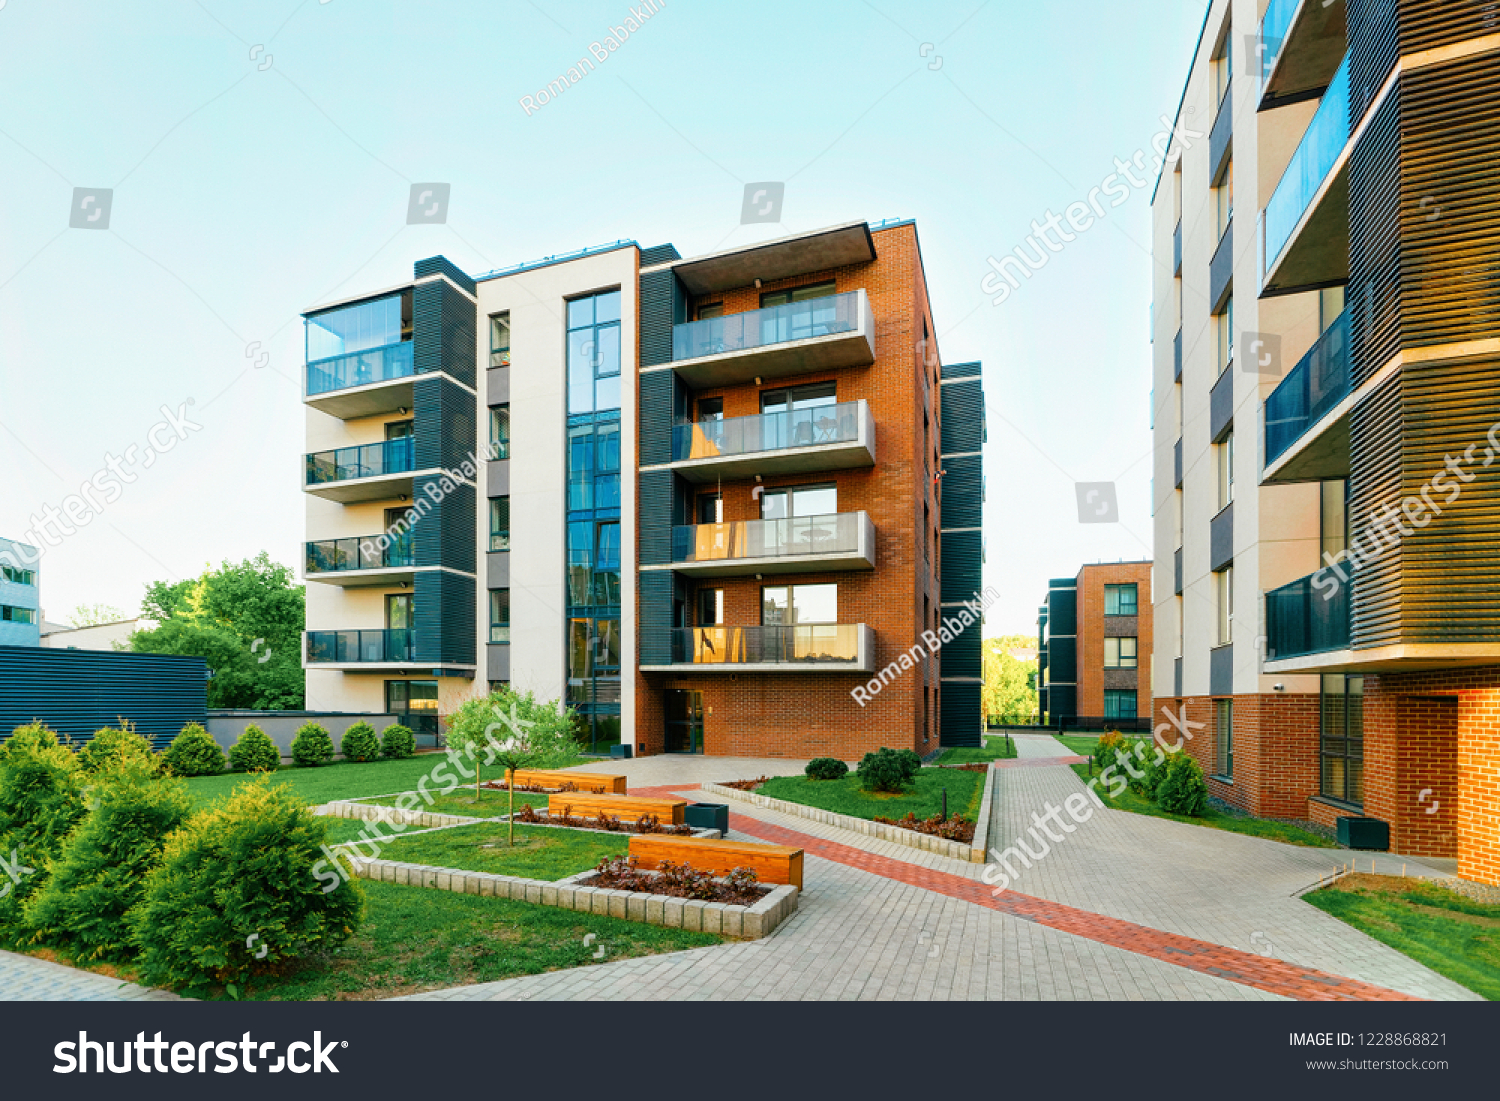 Modern new residential apartment house building complex, with outdoor facilities concept. With benches